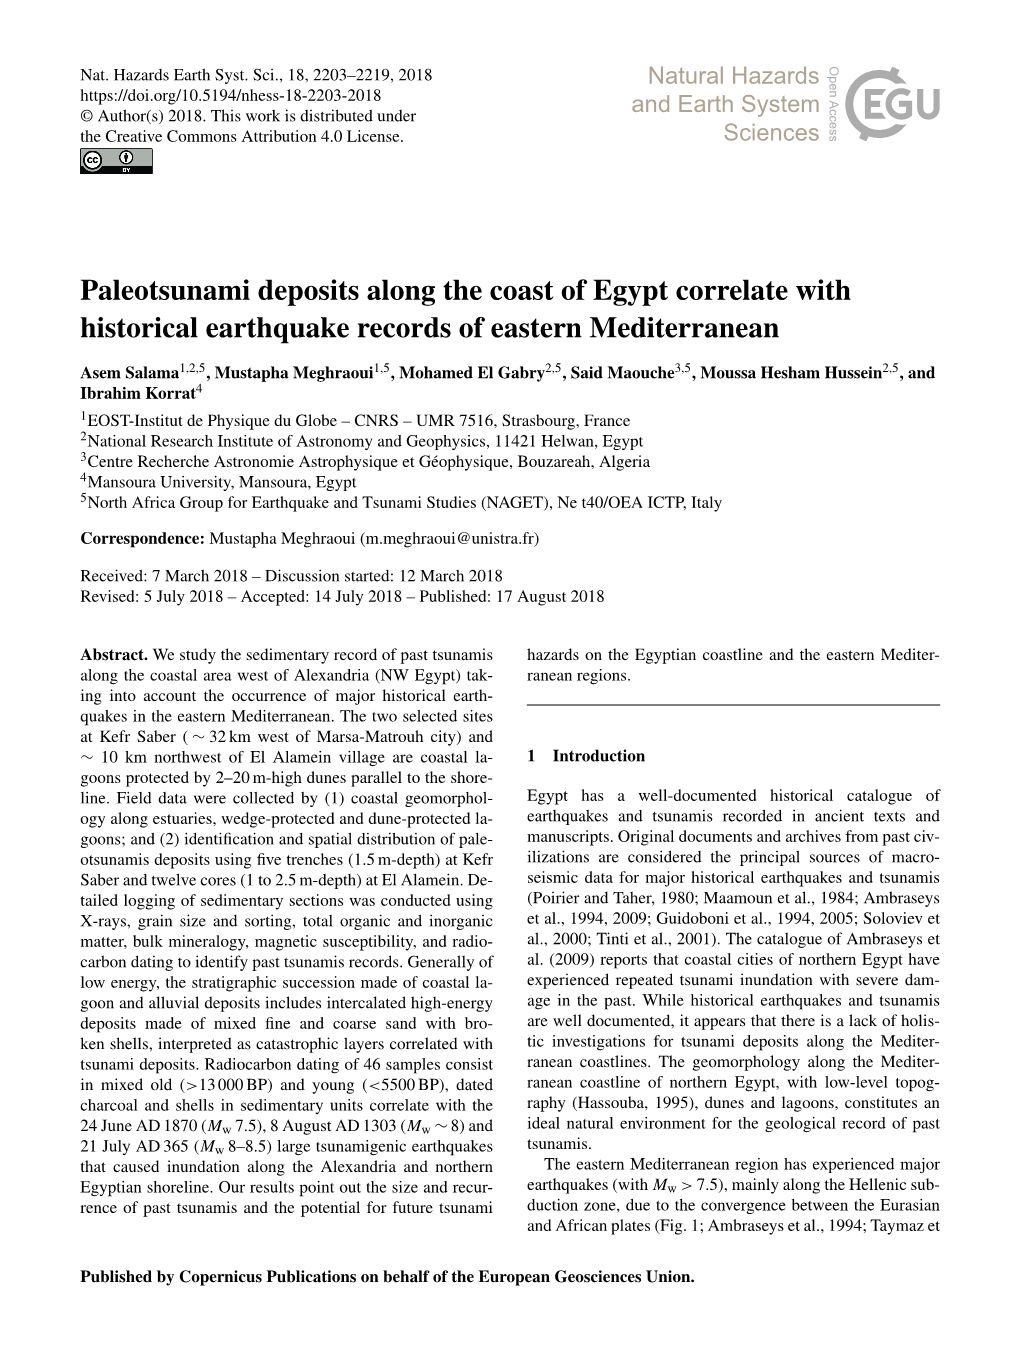 Paleotsunami Deposits Along the Coast of Egypt Correlate with Historical Earthquake Records of Eastern Mediterranean